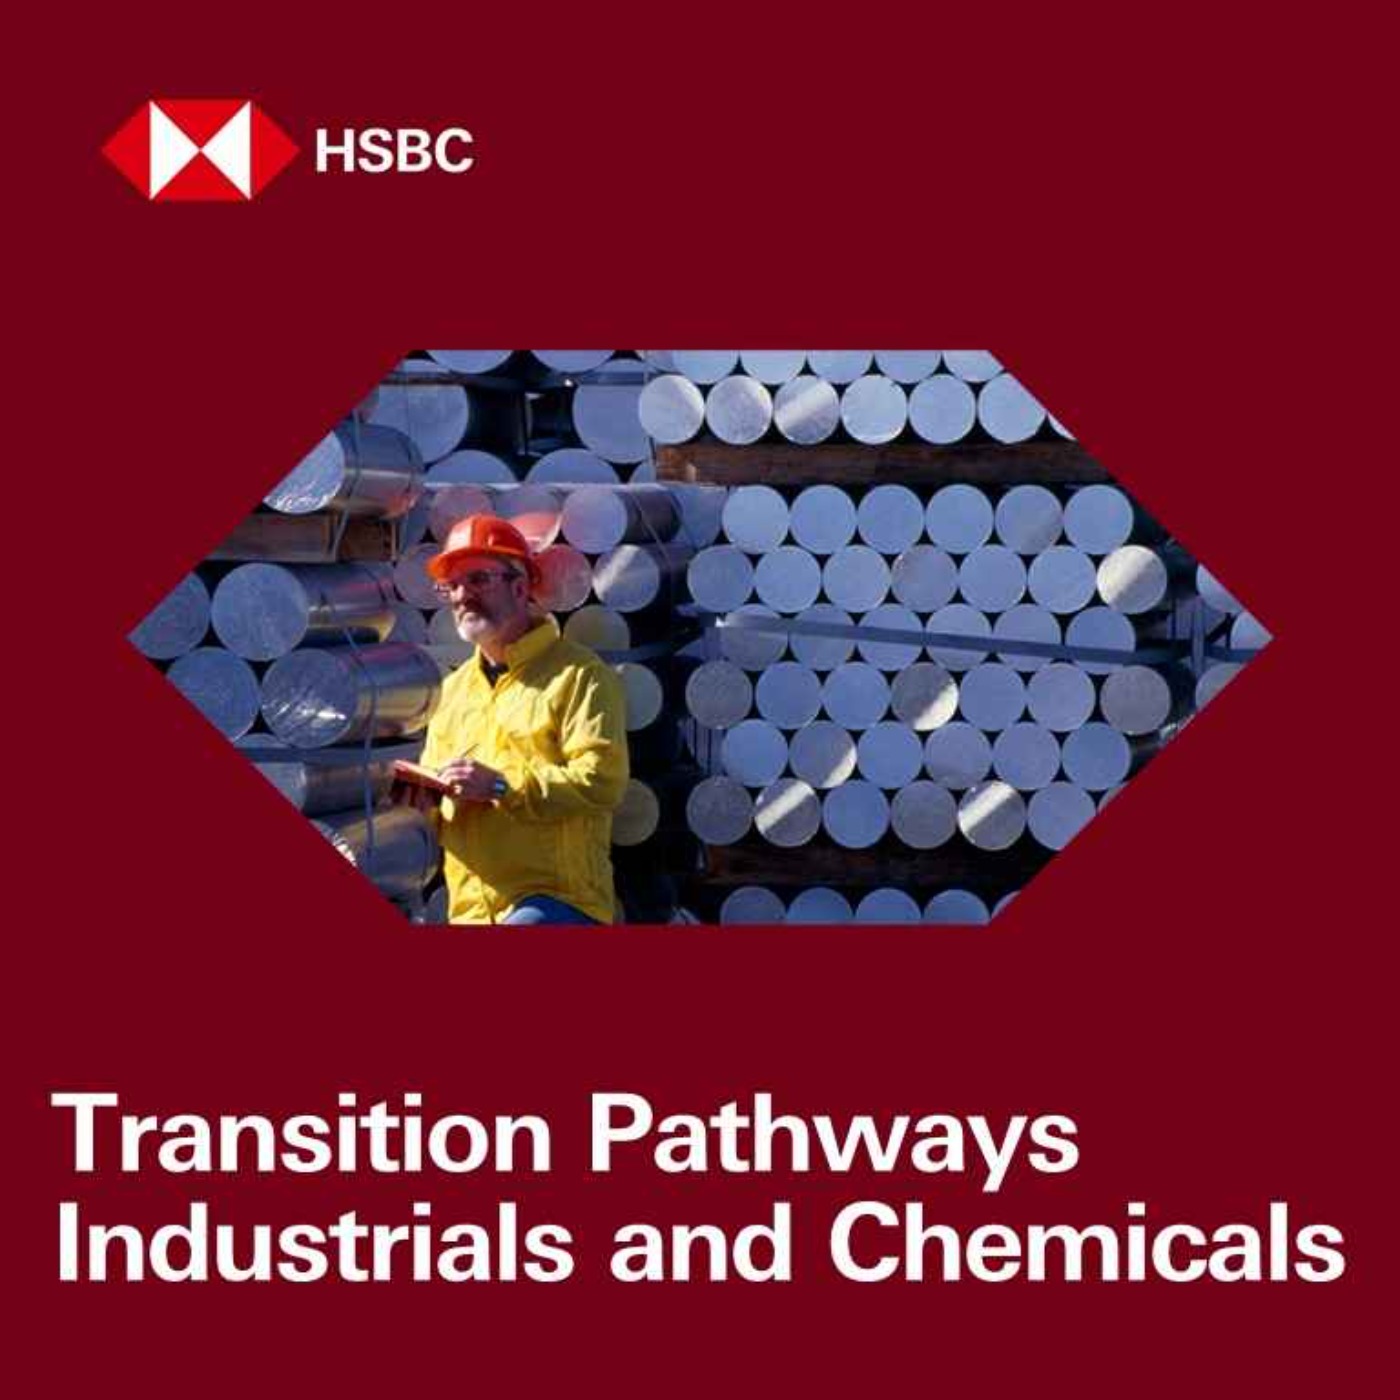 HSBC Transition Pathways: From supply gaps to opportunities in the materials industry